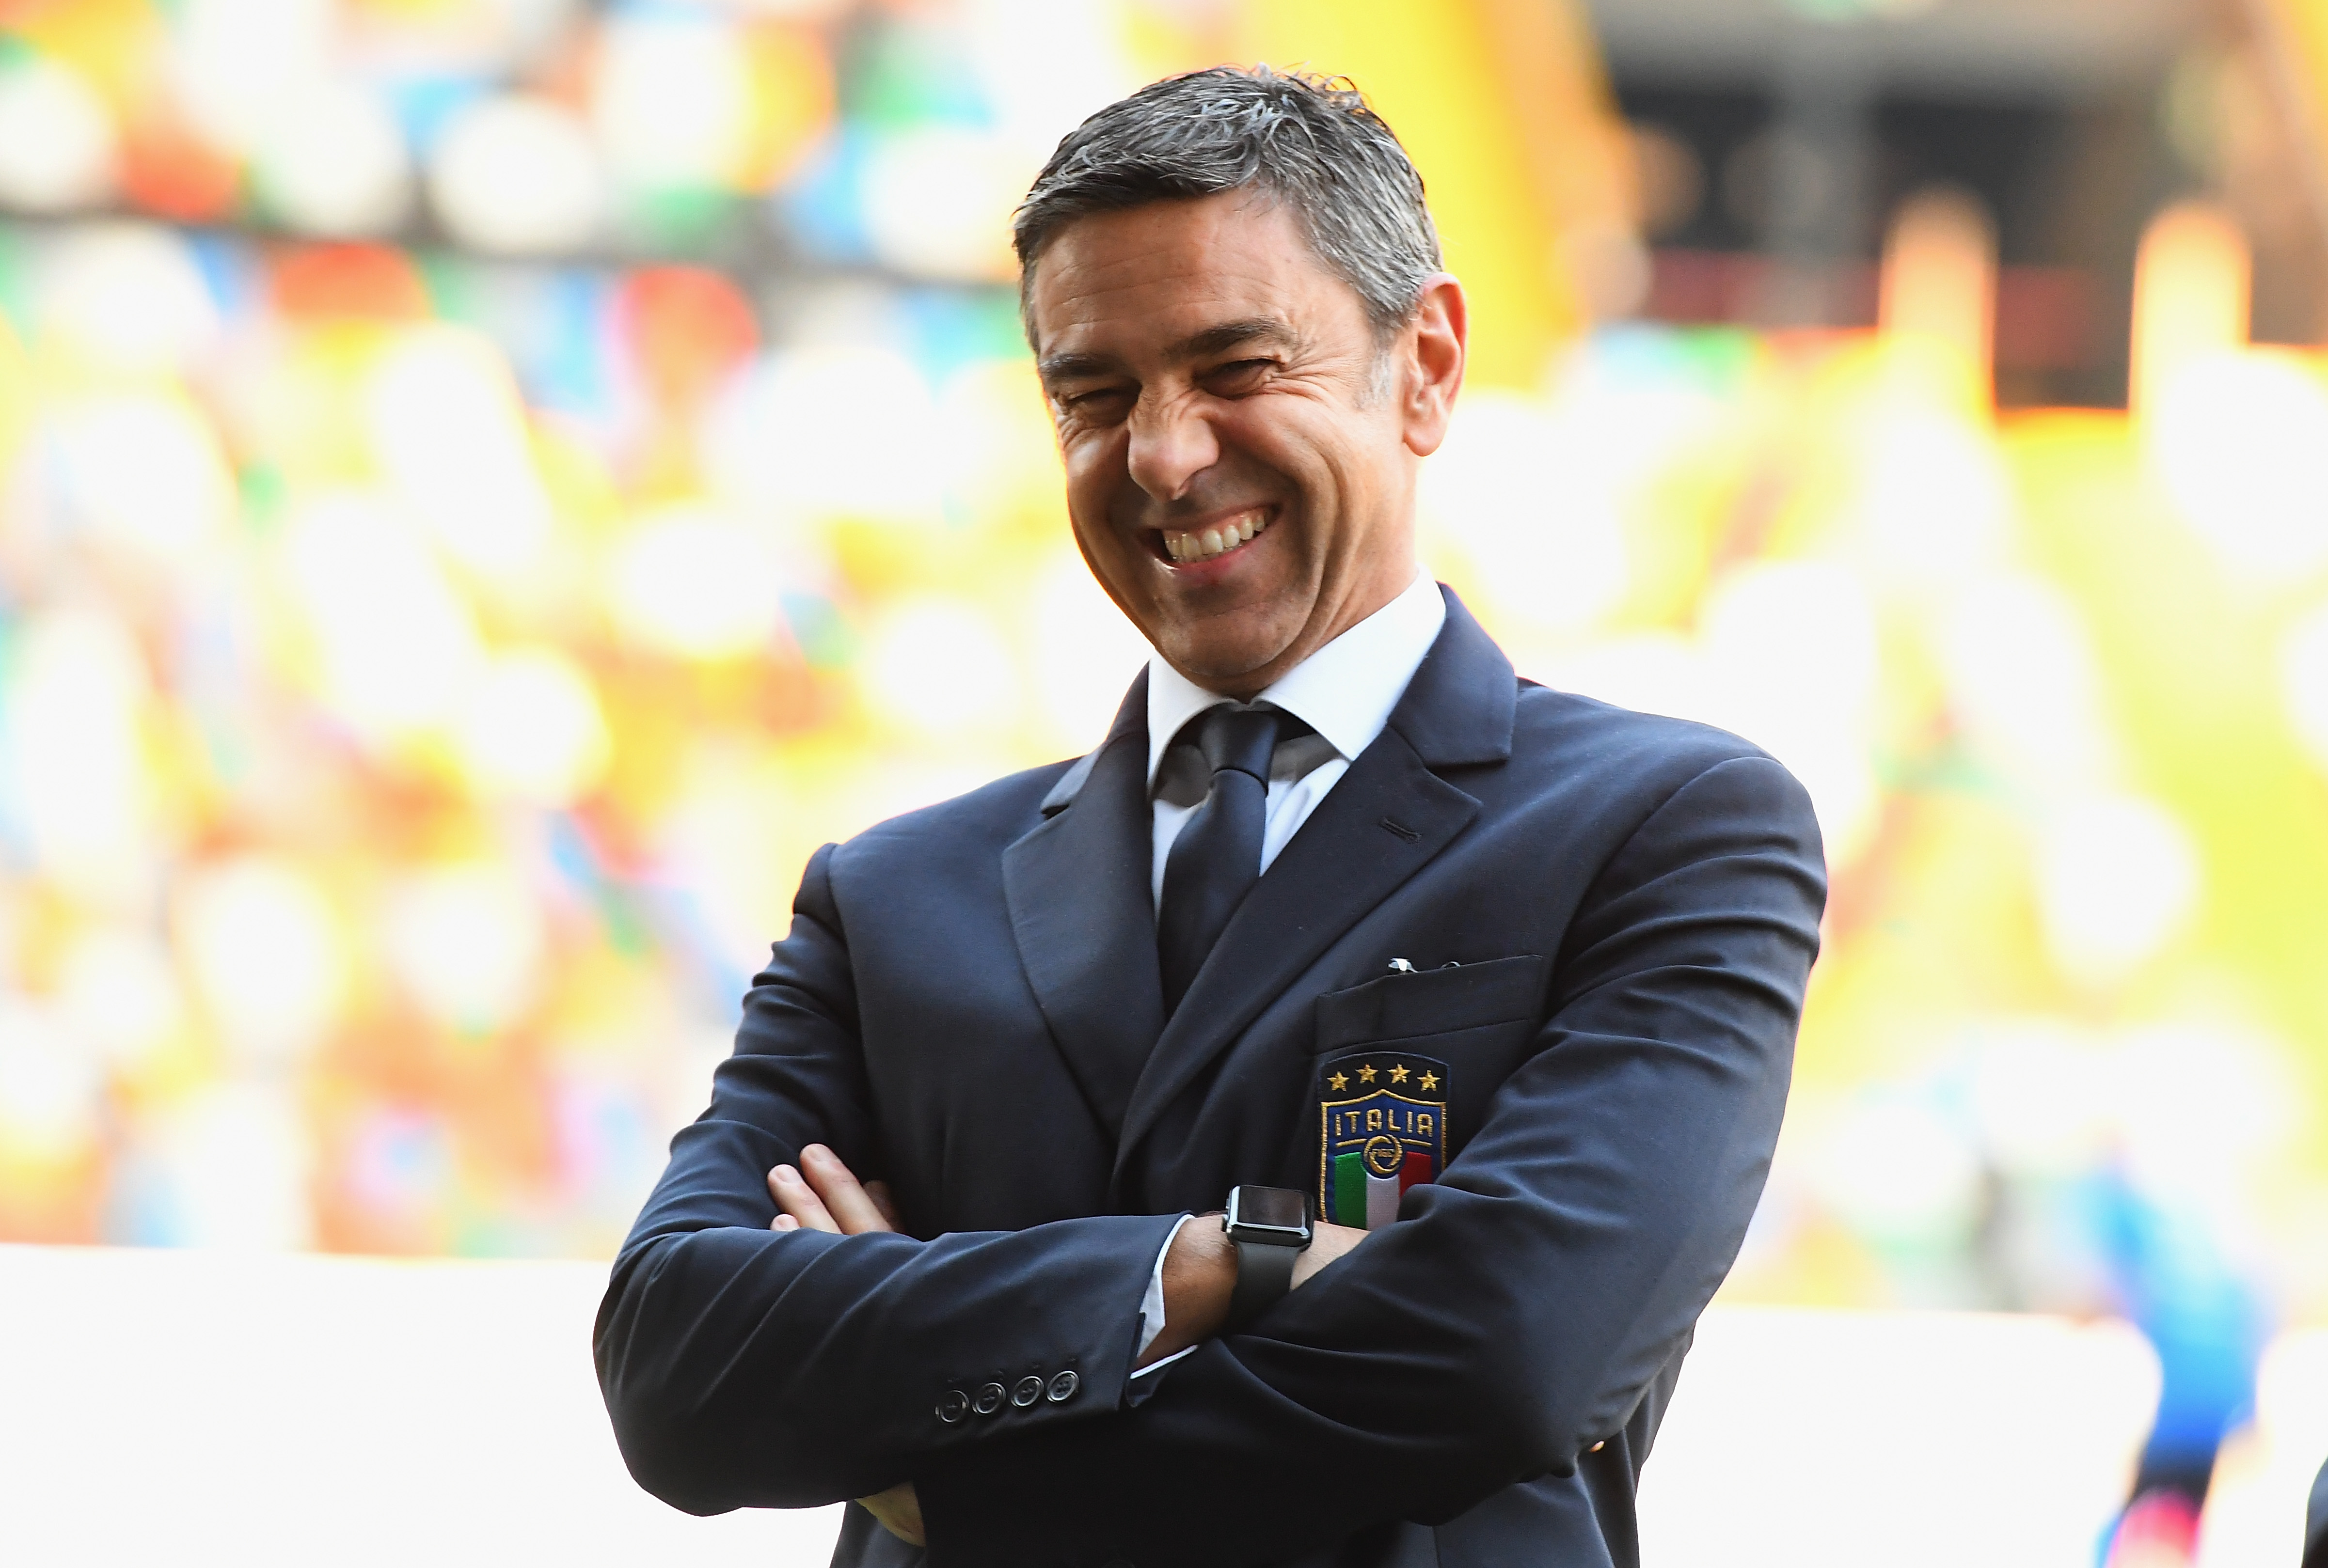 UDINE, ITALY - OCTOBER 11:  Alessandro Costacurta Commissioner of FIGC  looks on before the International Friendly match between Italy U21 and Belgium U21 at Friuli Stadium on October 11, 2018 in Udine, Italy.  (Photo by Alessandro Sabattini/Getty Images)